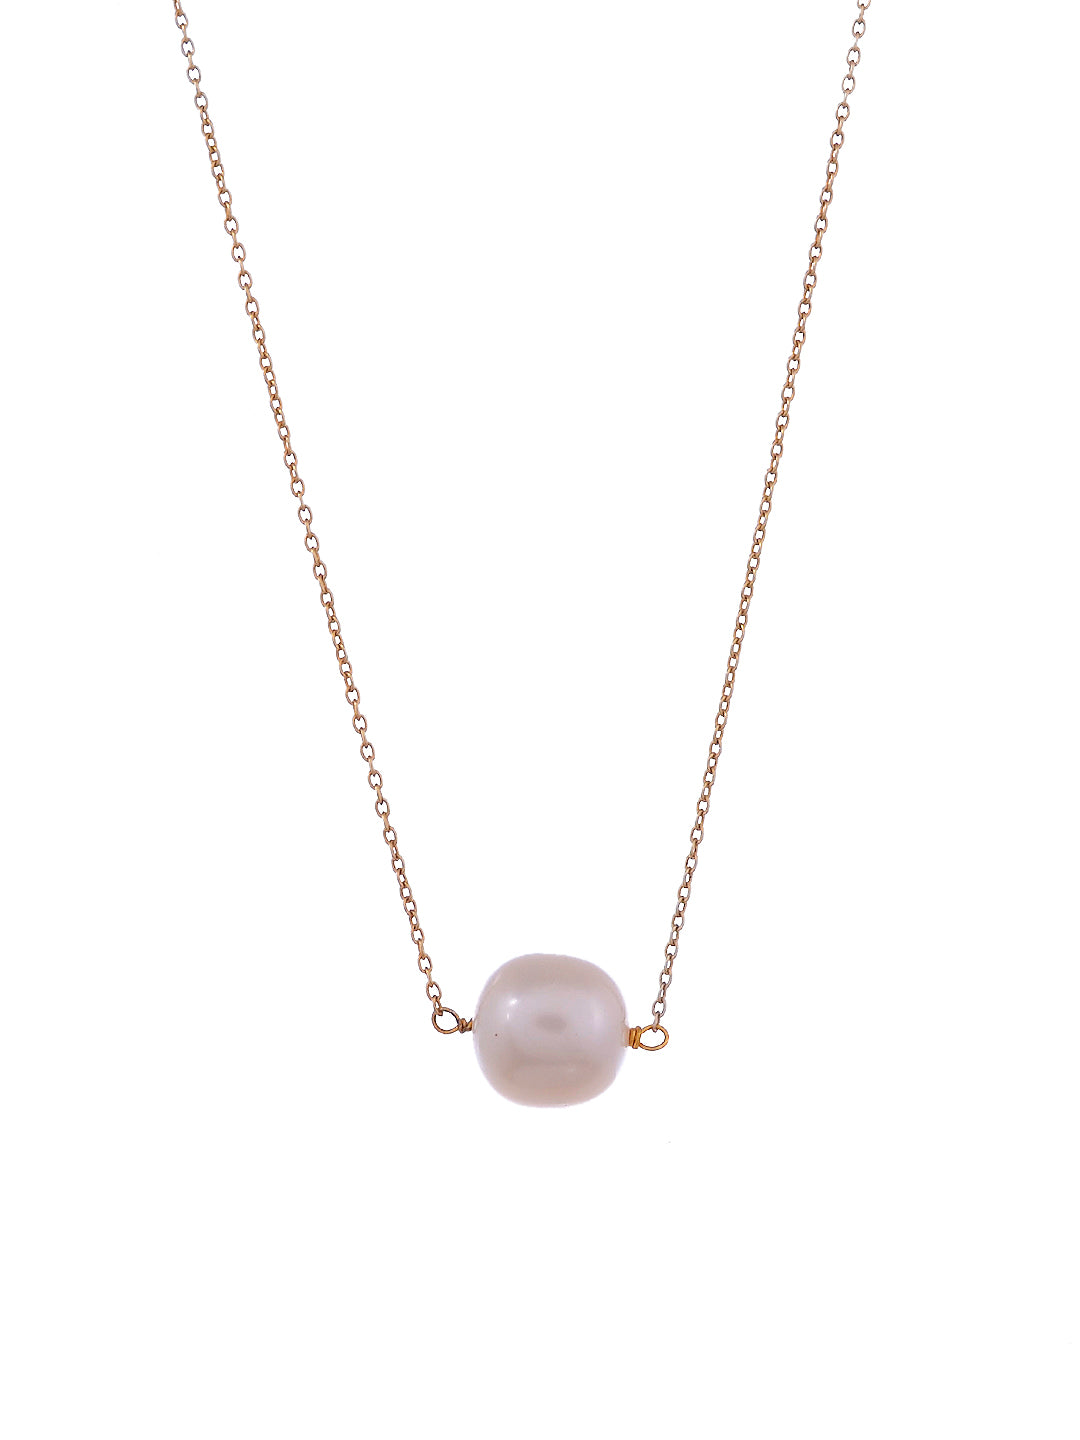 Pearl Sterling Silver Chain - 925 Silver Necklace for Women Online